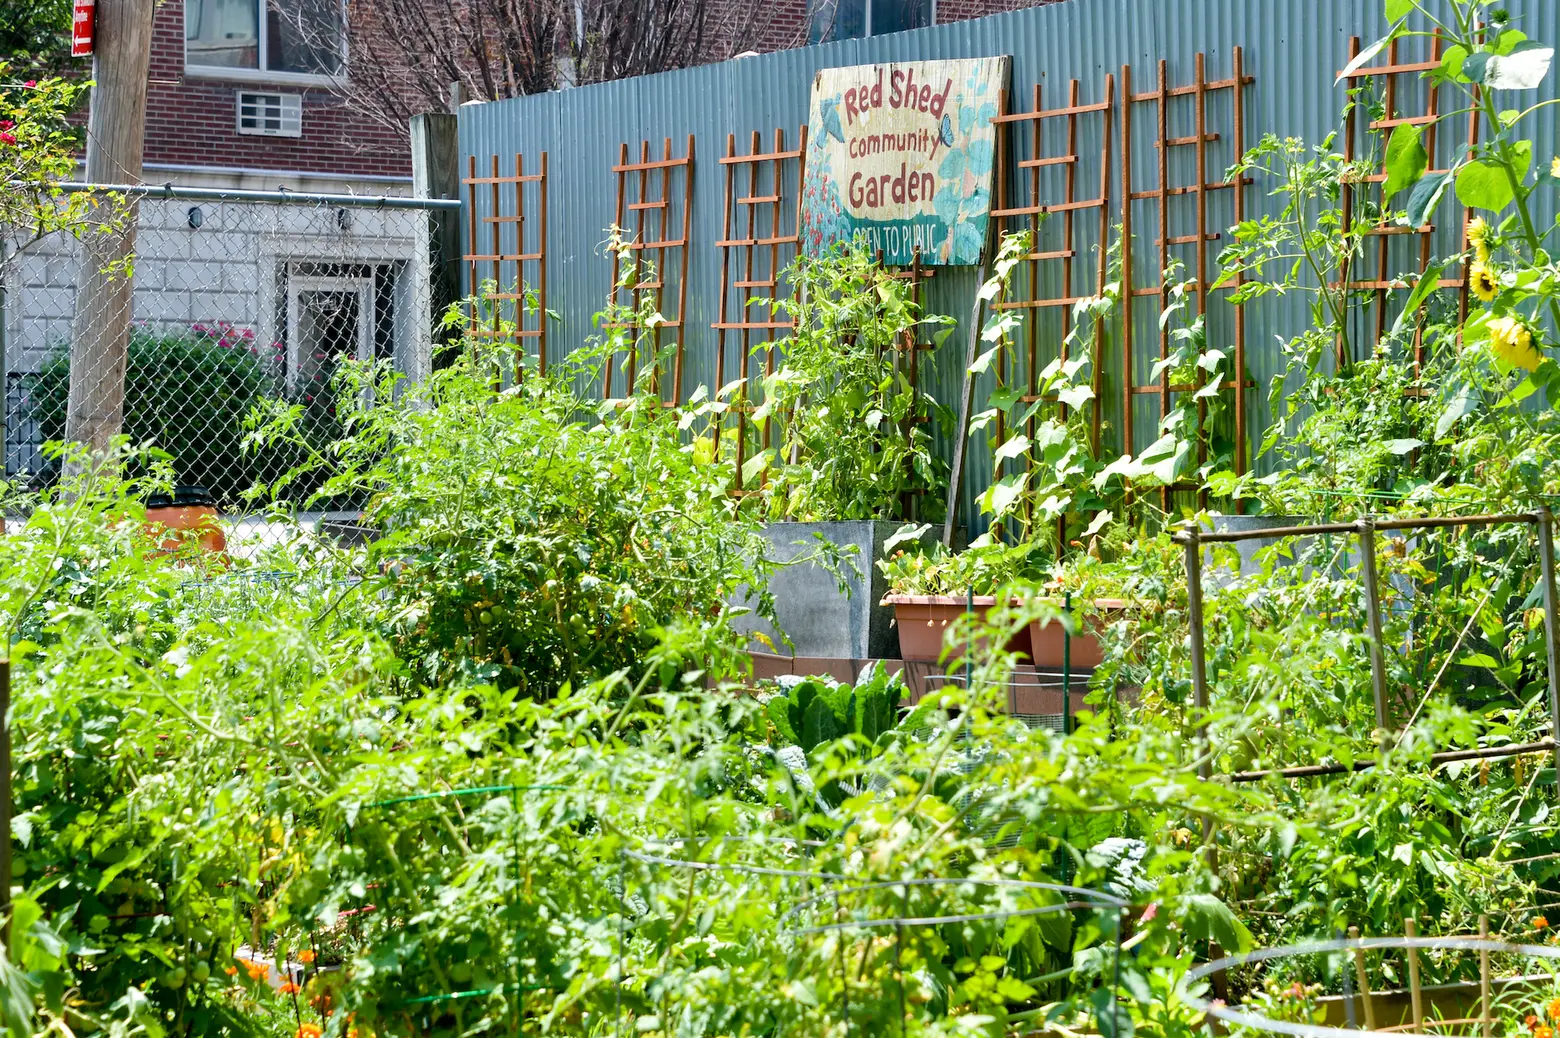 100+ community gardens in NYC will open to the public this weekend